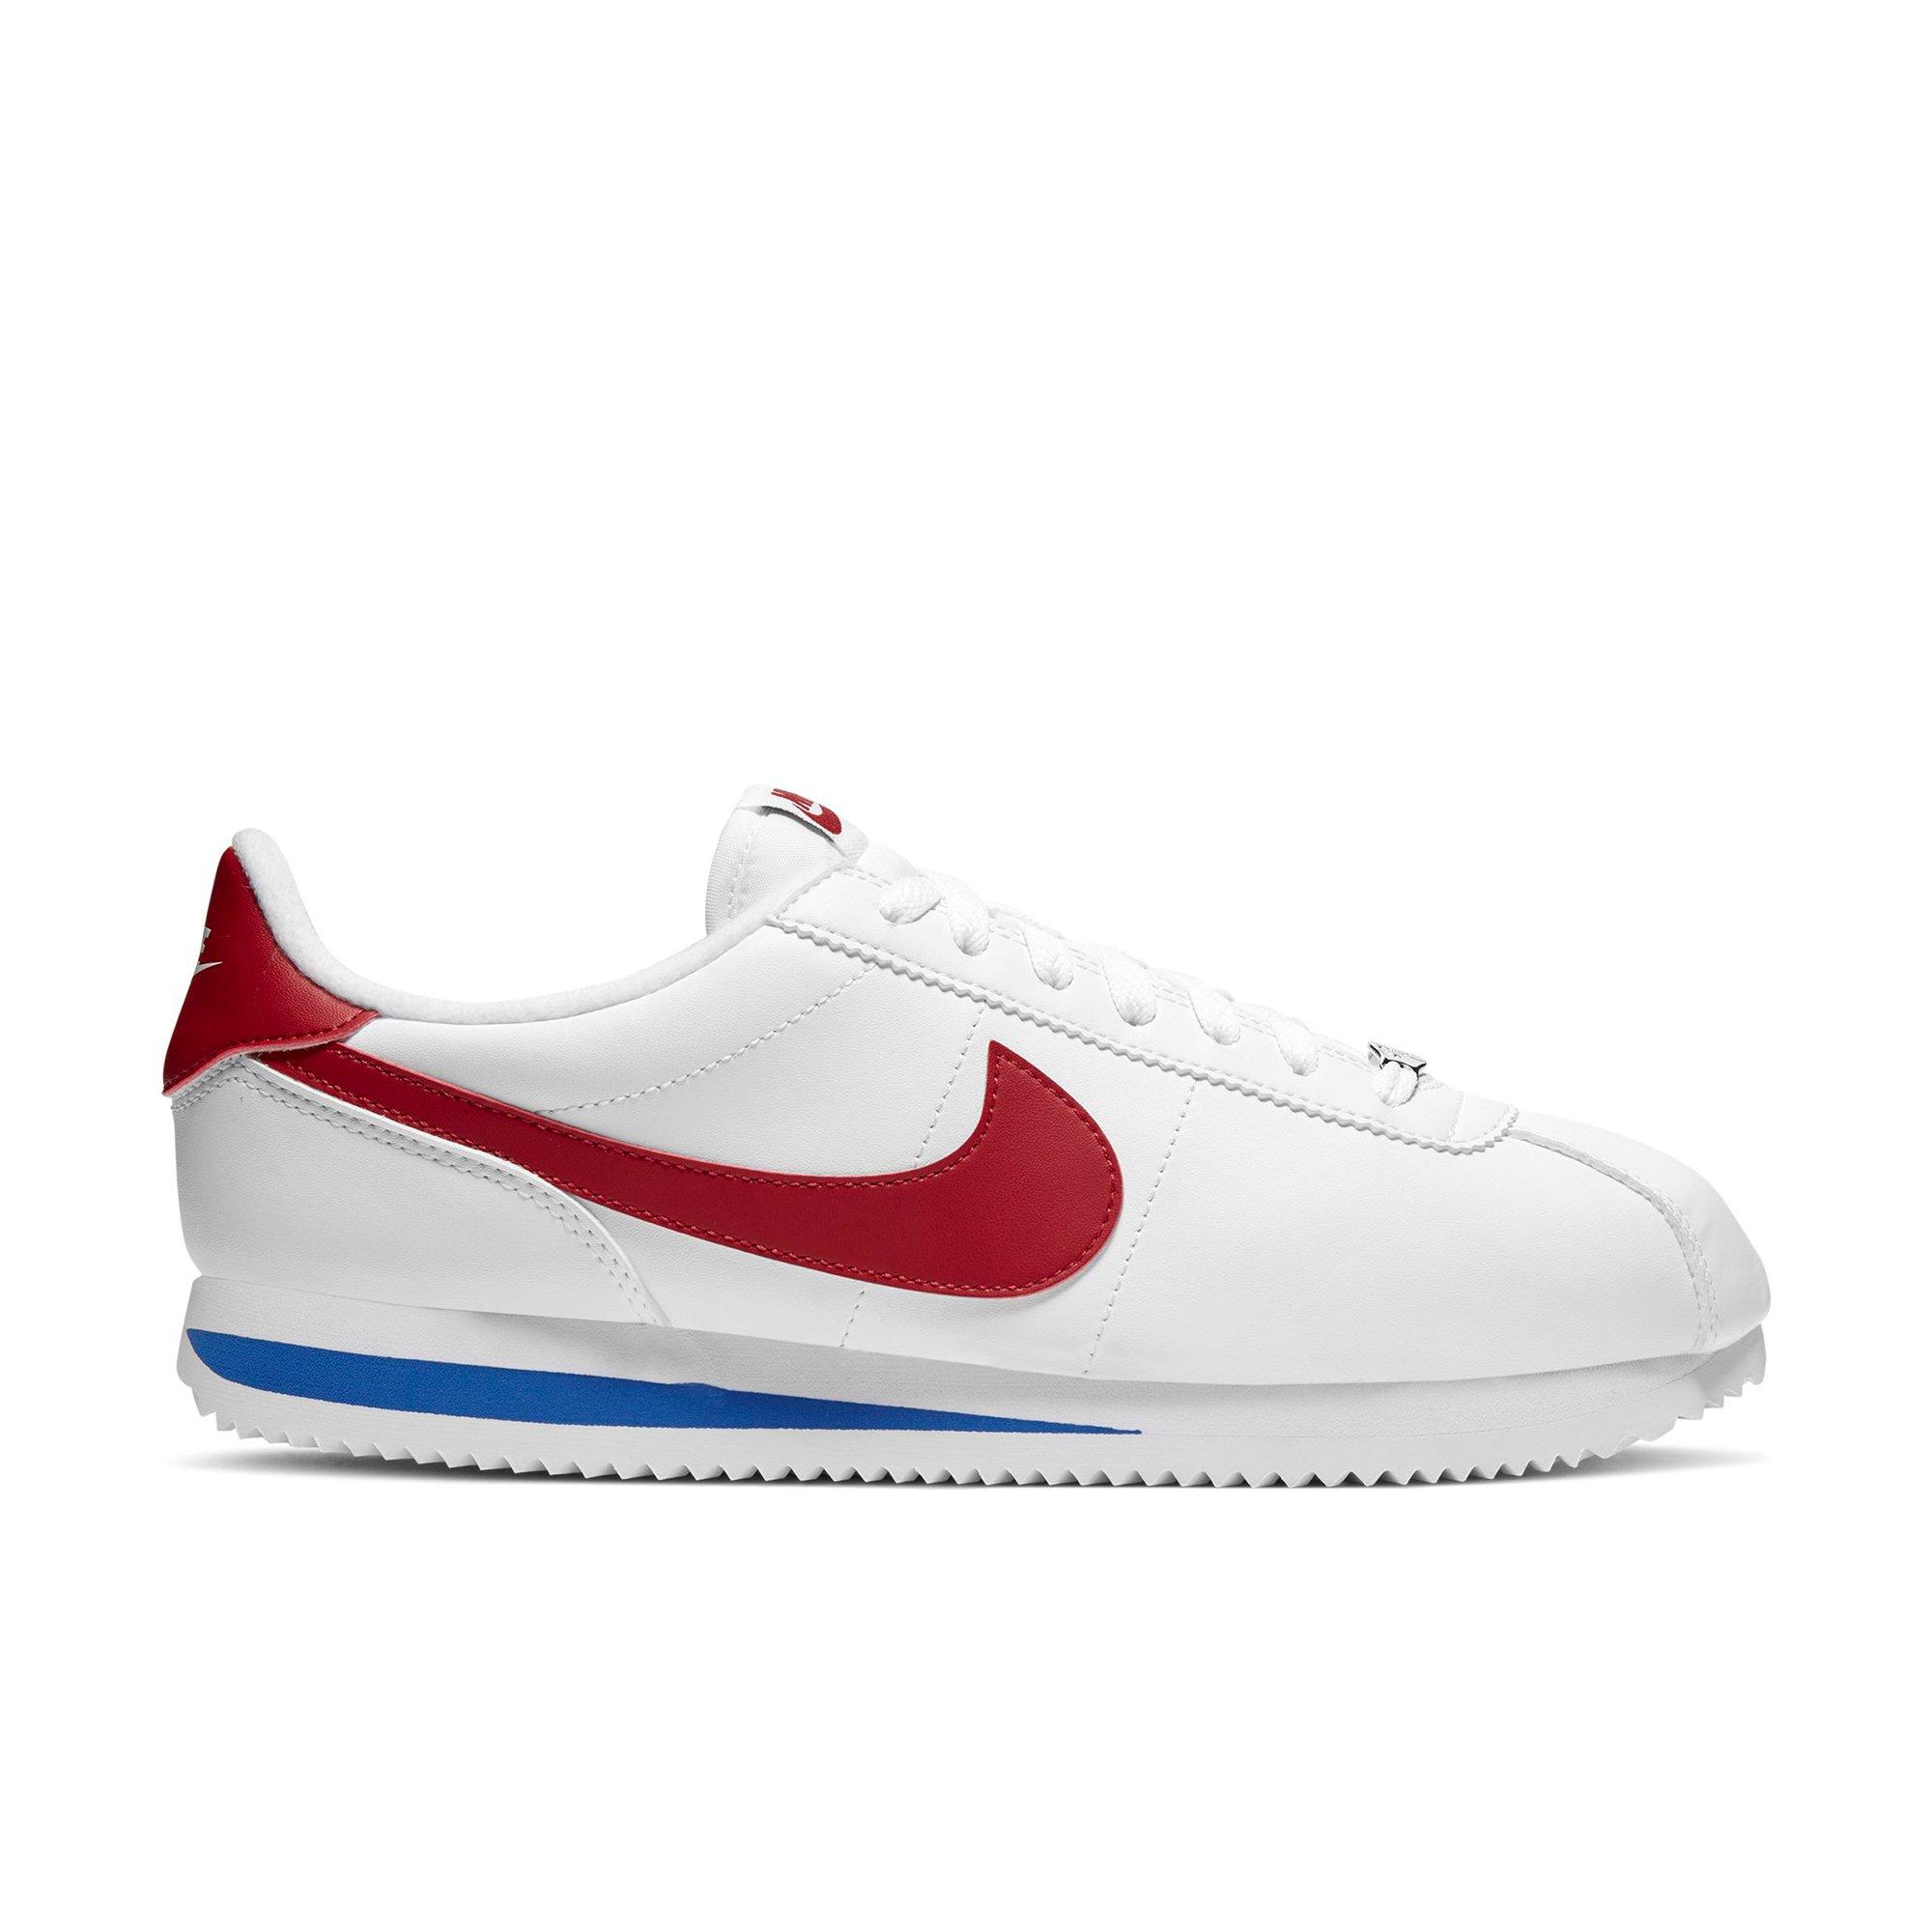 red white and blue nike mens shoes